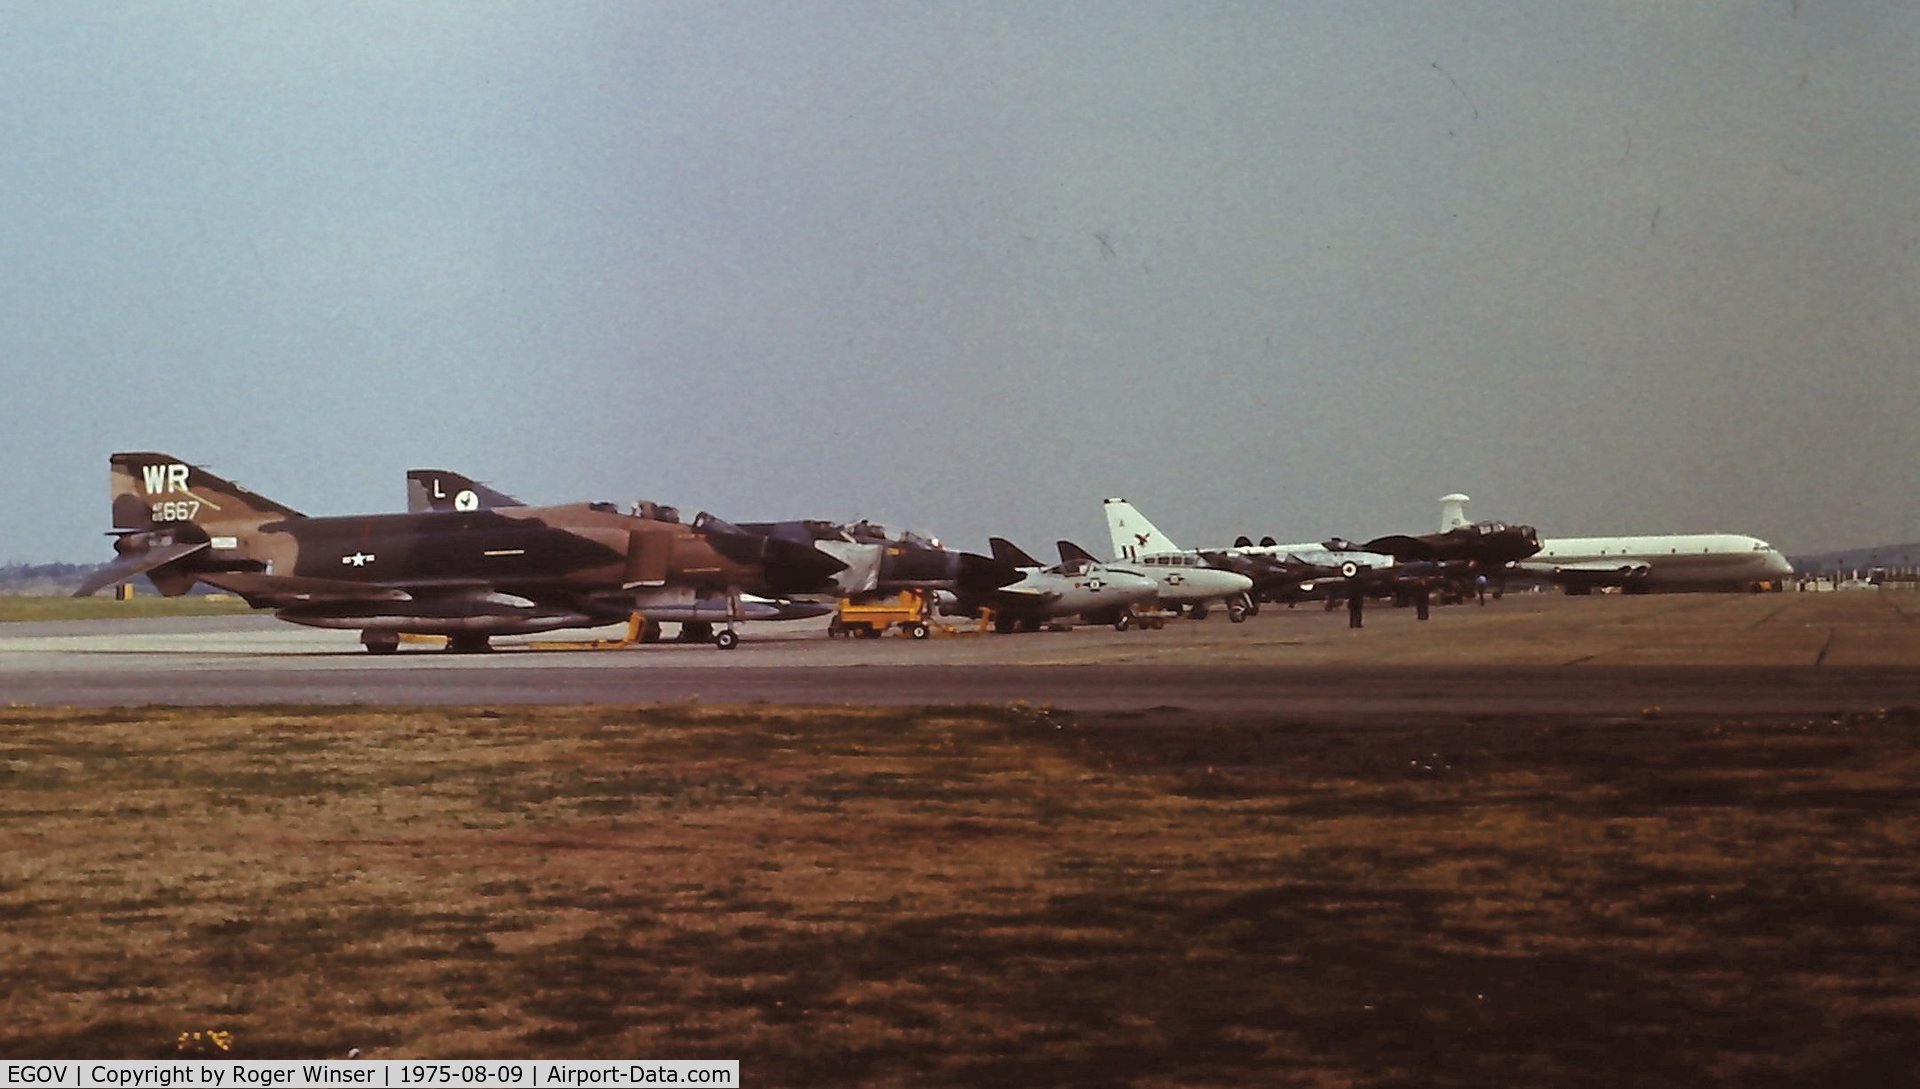 Anglesey Airport (Maes Awyr Môn) or RAF Valley, Anglesey United Kingdom (EGOV) - Line up of visiting aircraft at the RAF Valley Air Show 1975.